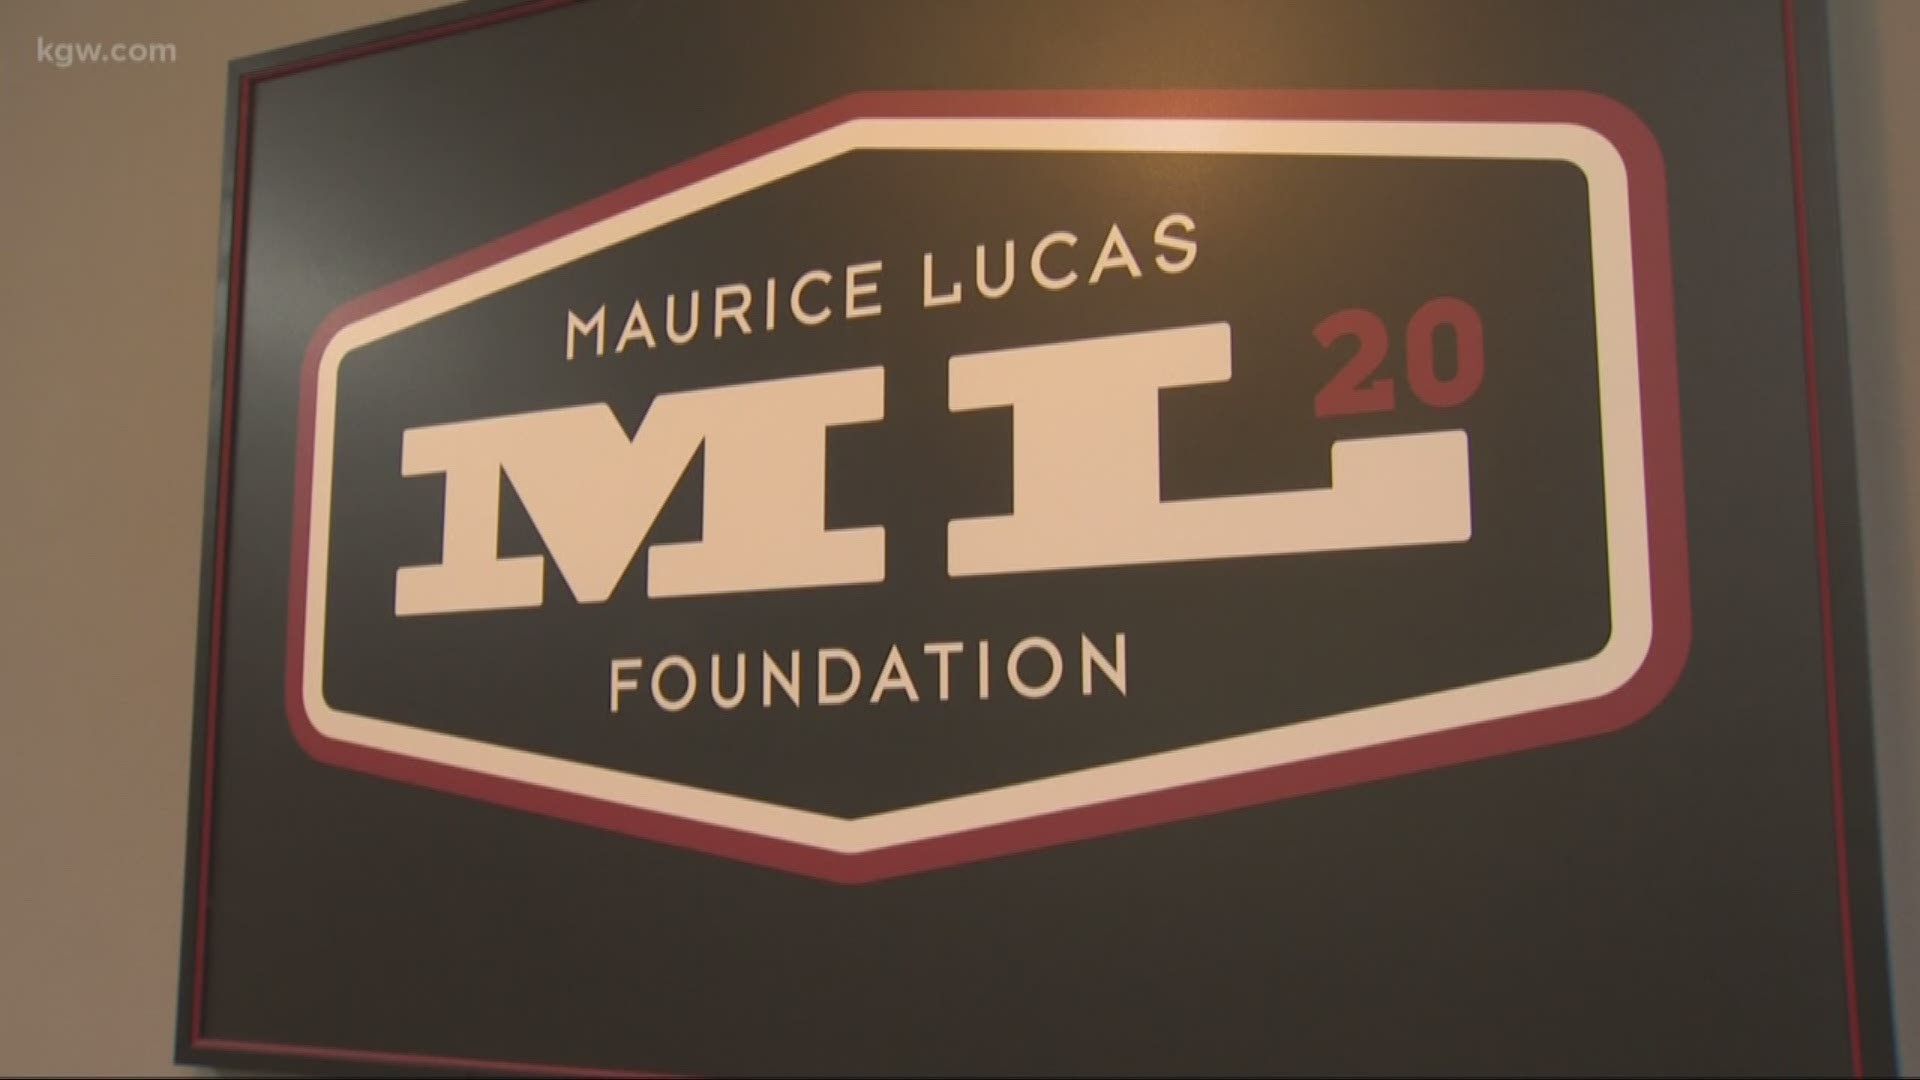 A look at the work of the Maurice Lucas Foundation.